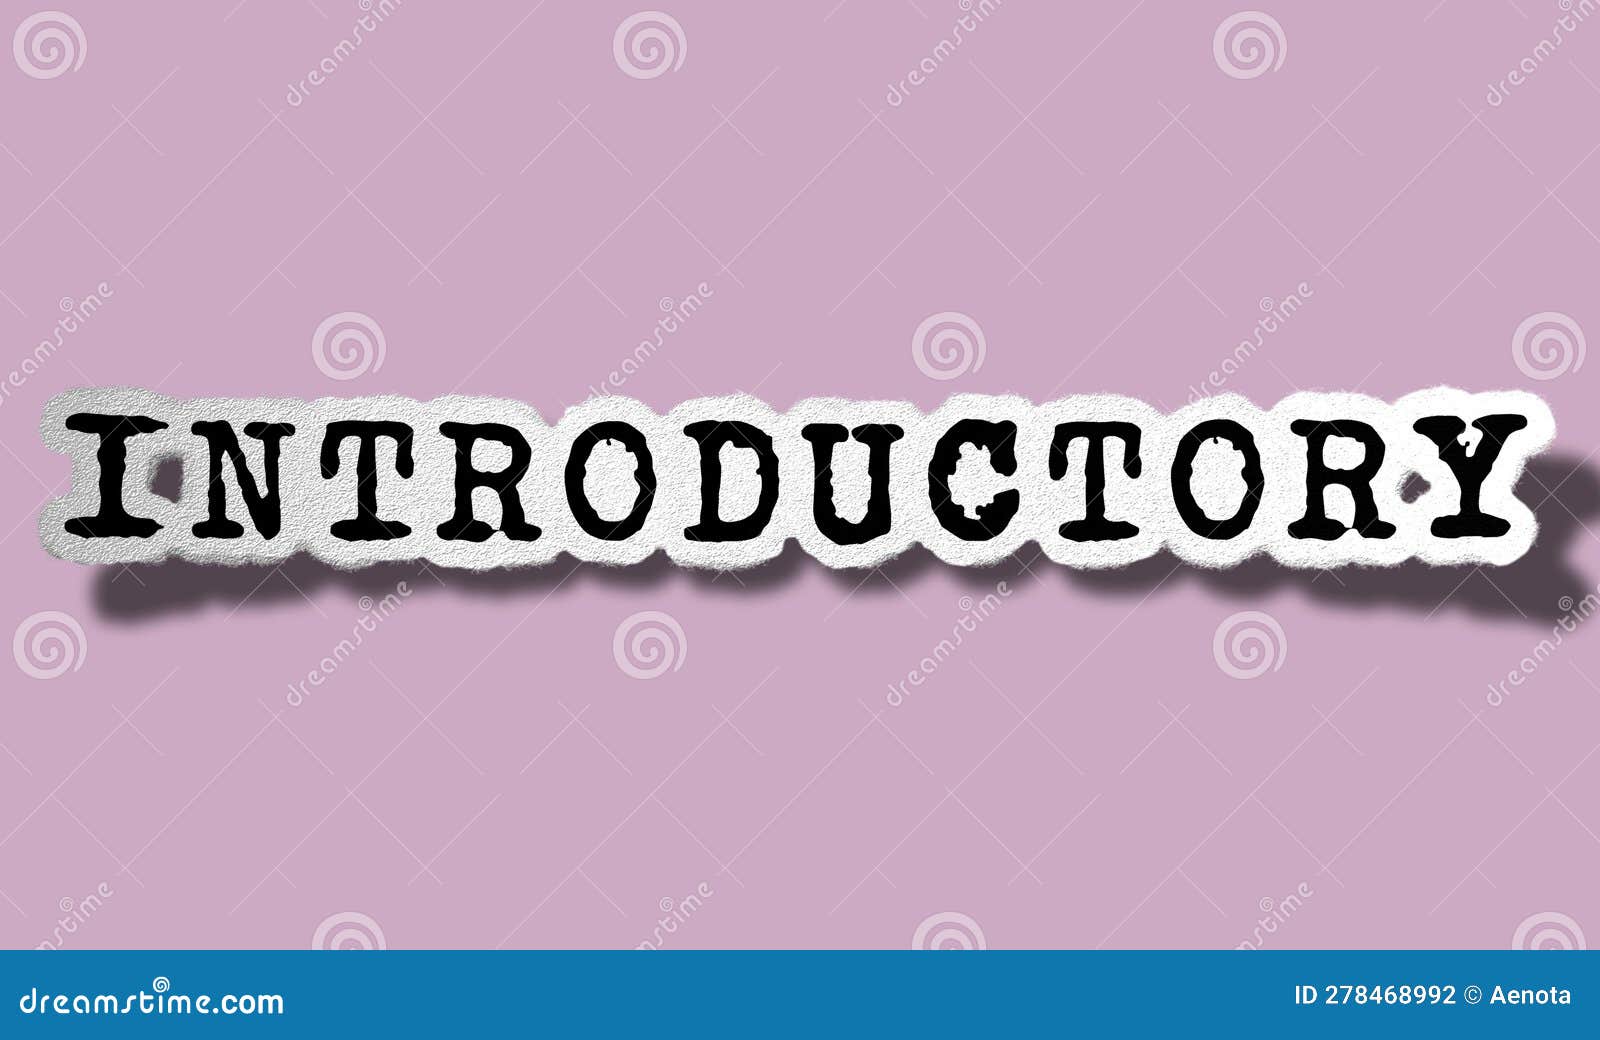 introductory - flat tattered paper word on beige background